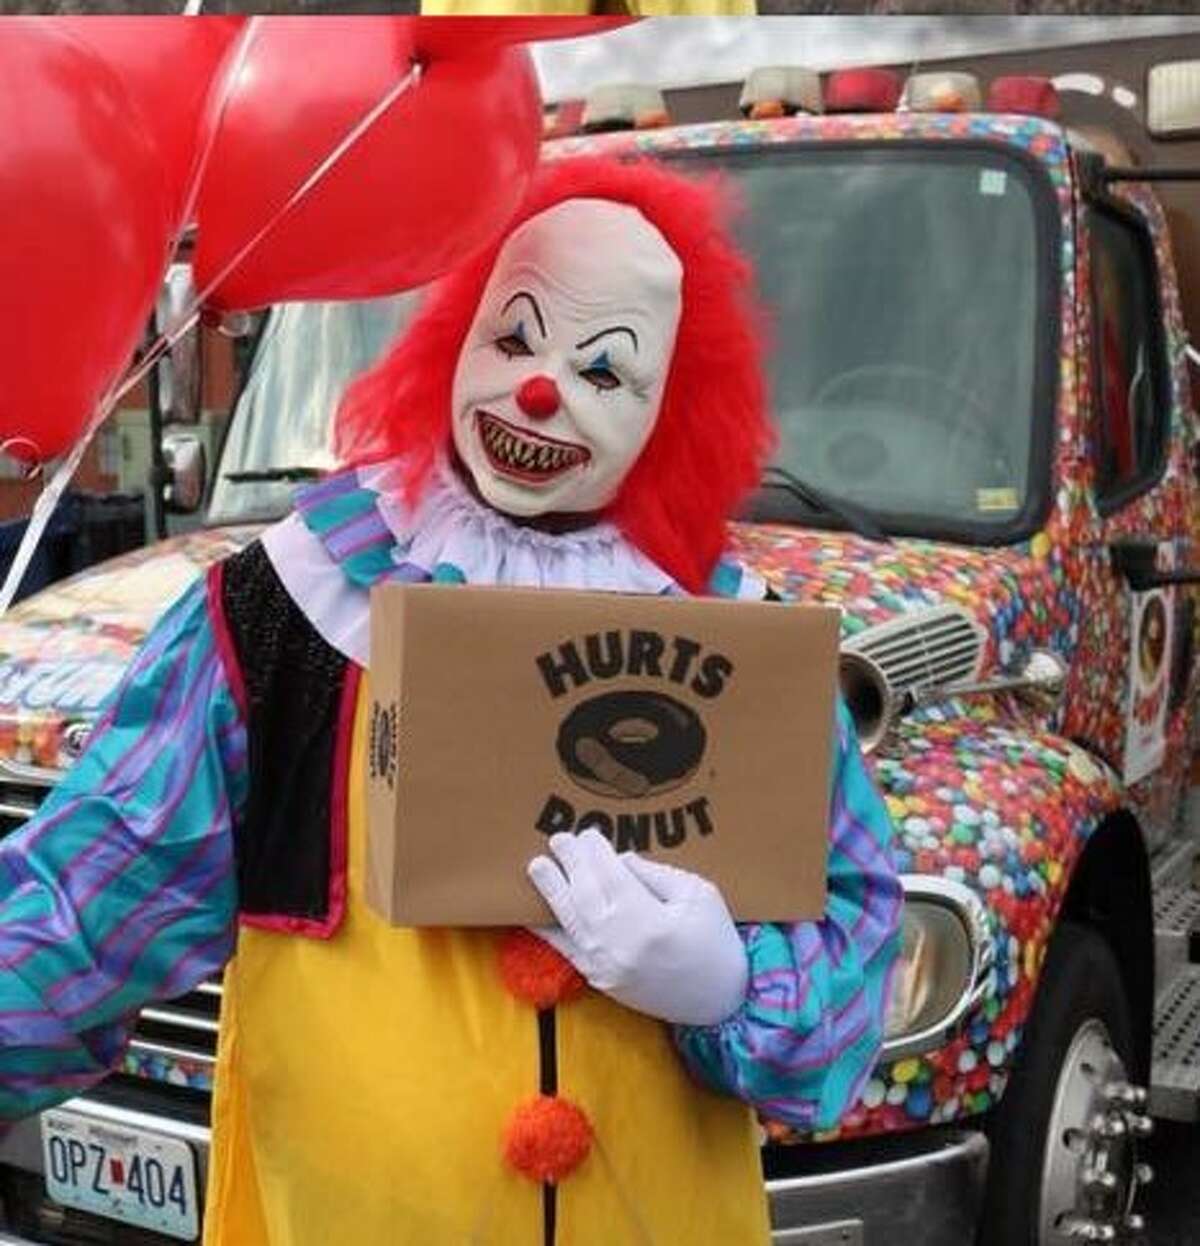 Starting Oct. 1 and throughout the entire month, all Hurts Donuts locations nationwide will offer customers the chance to deliver donuts via a scary clown.